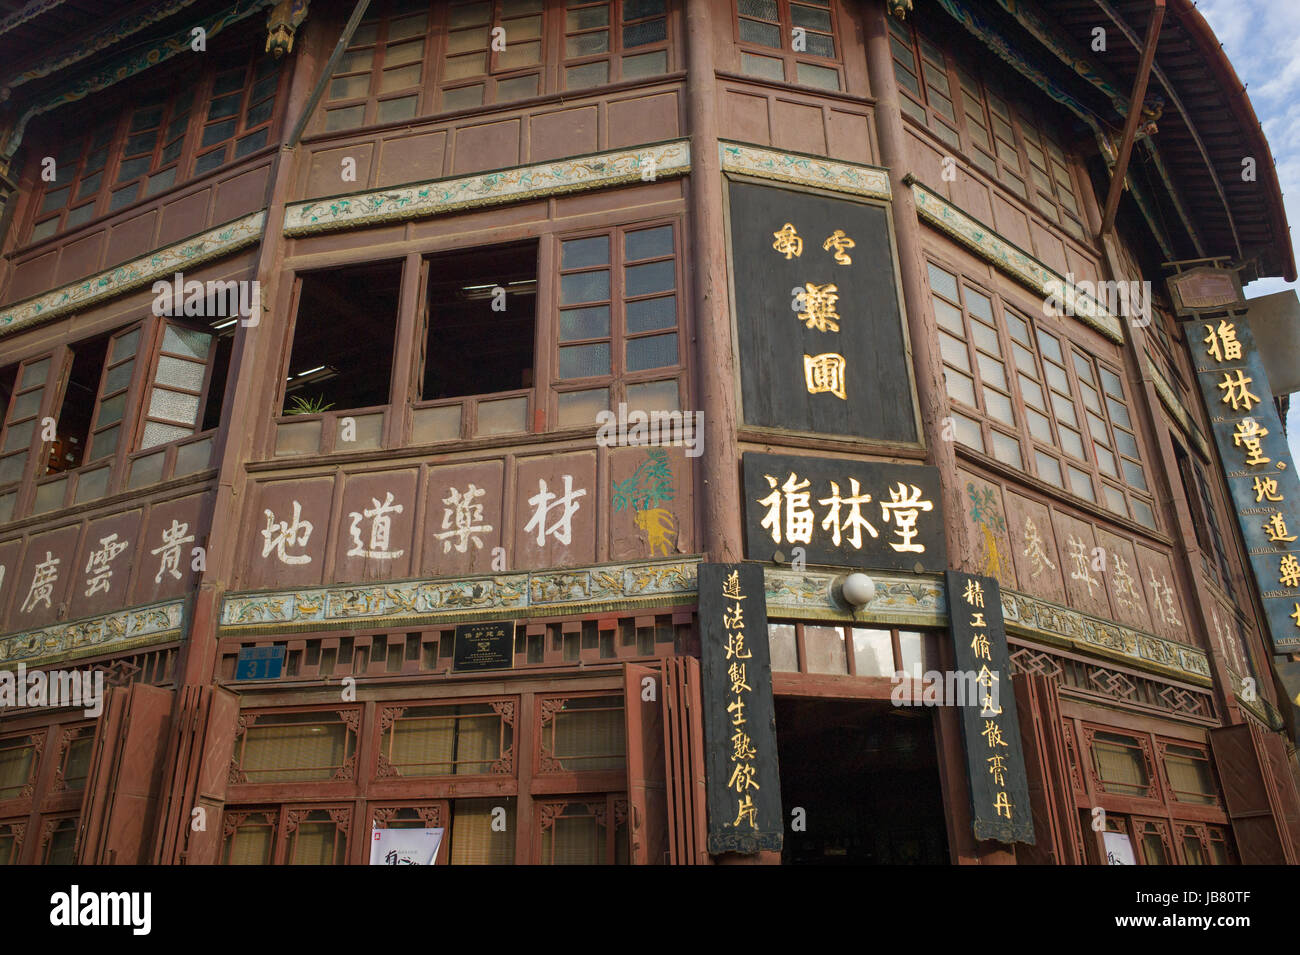 Traditional wooden building with Chinese characters, Kunming, Yunnan, China Stock Photo